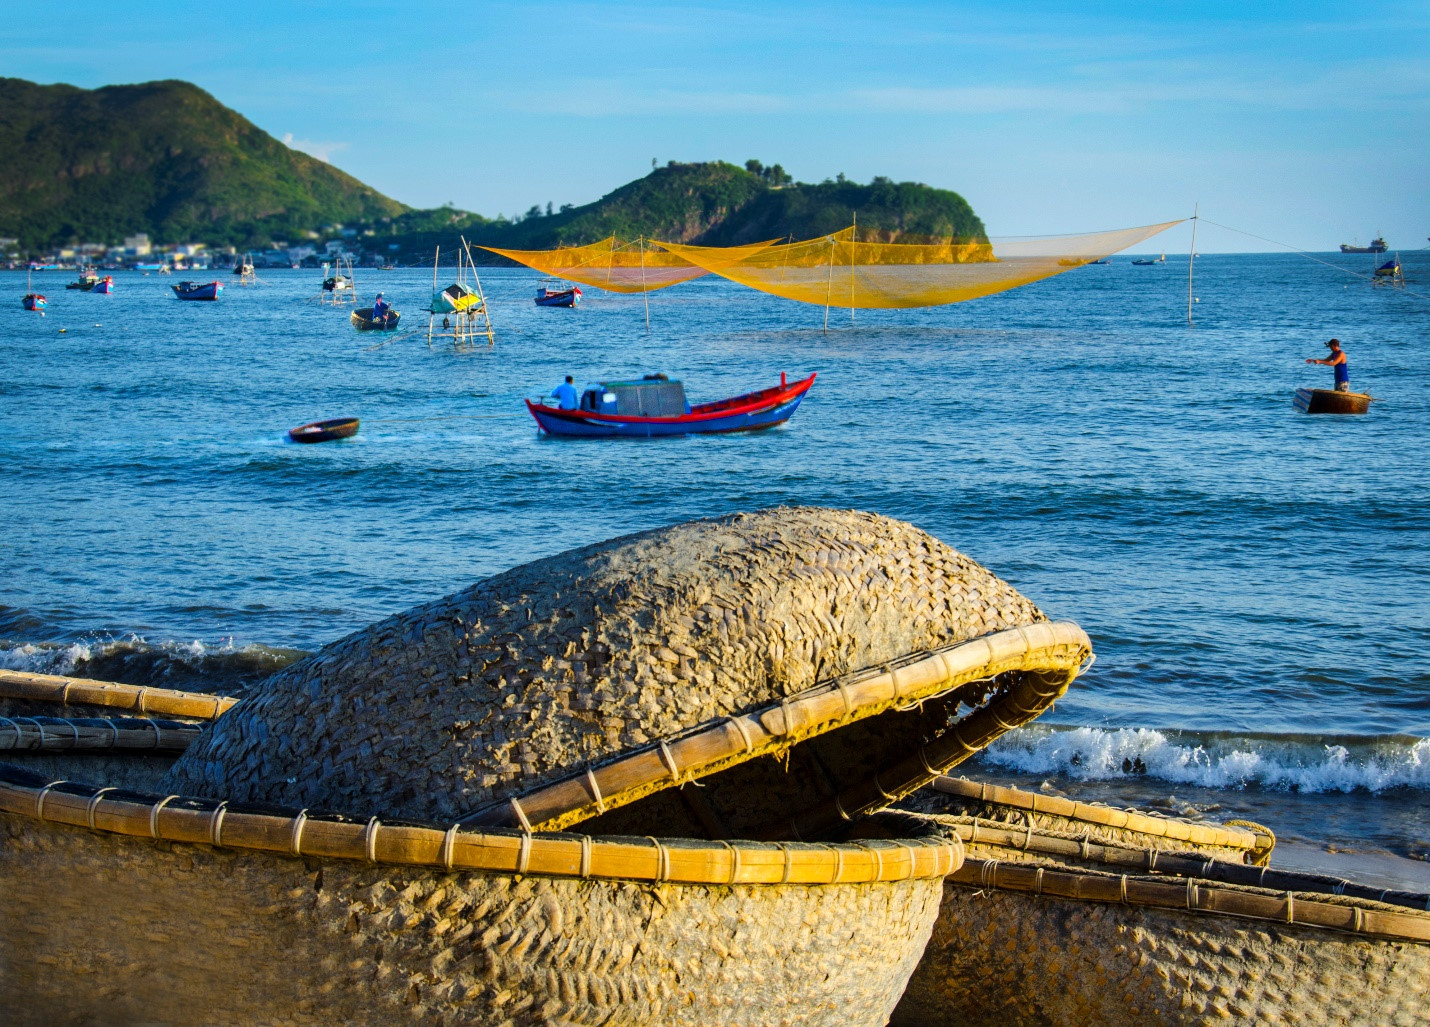 How to get to Quy Nhon